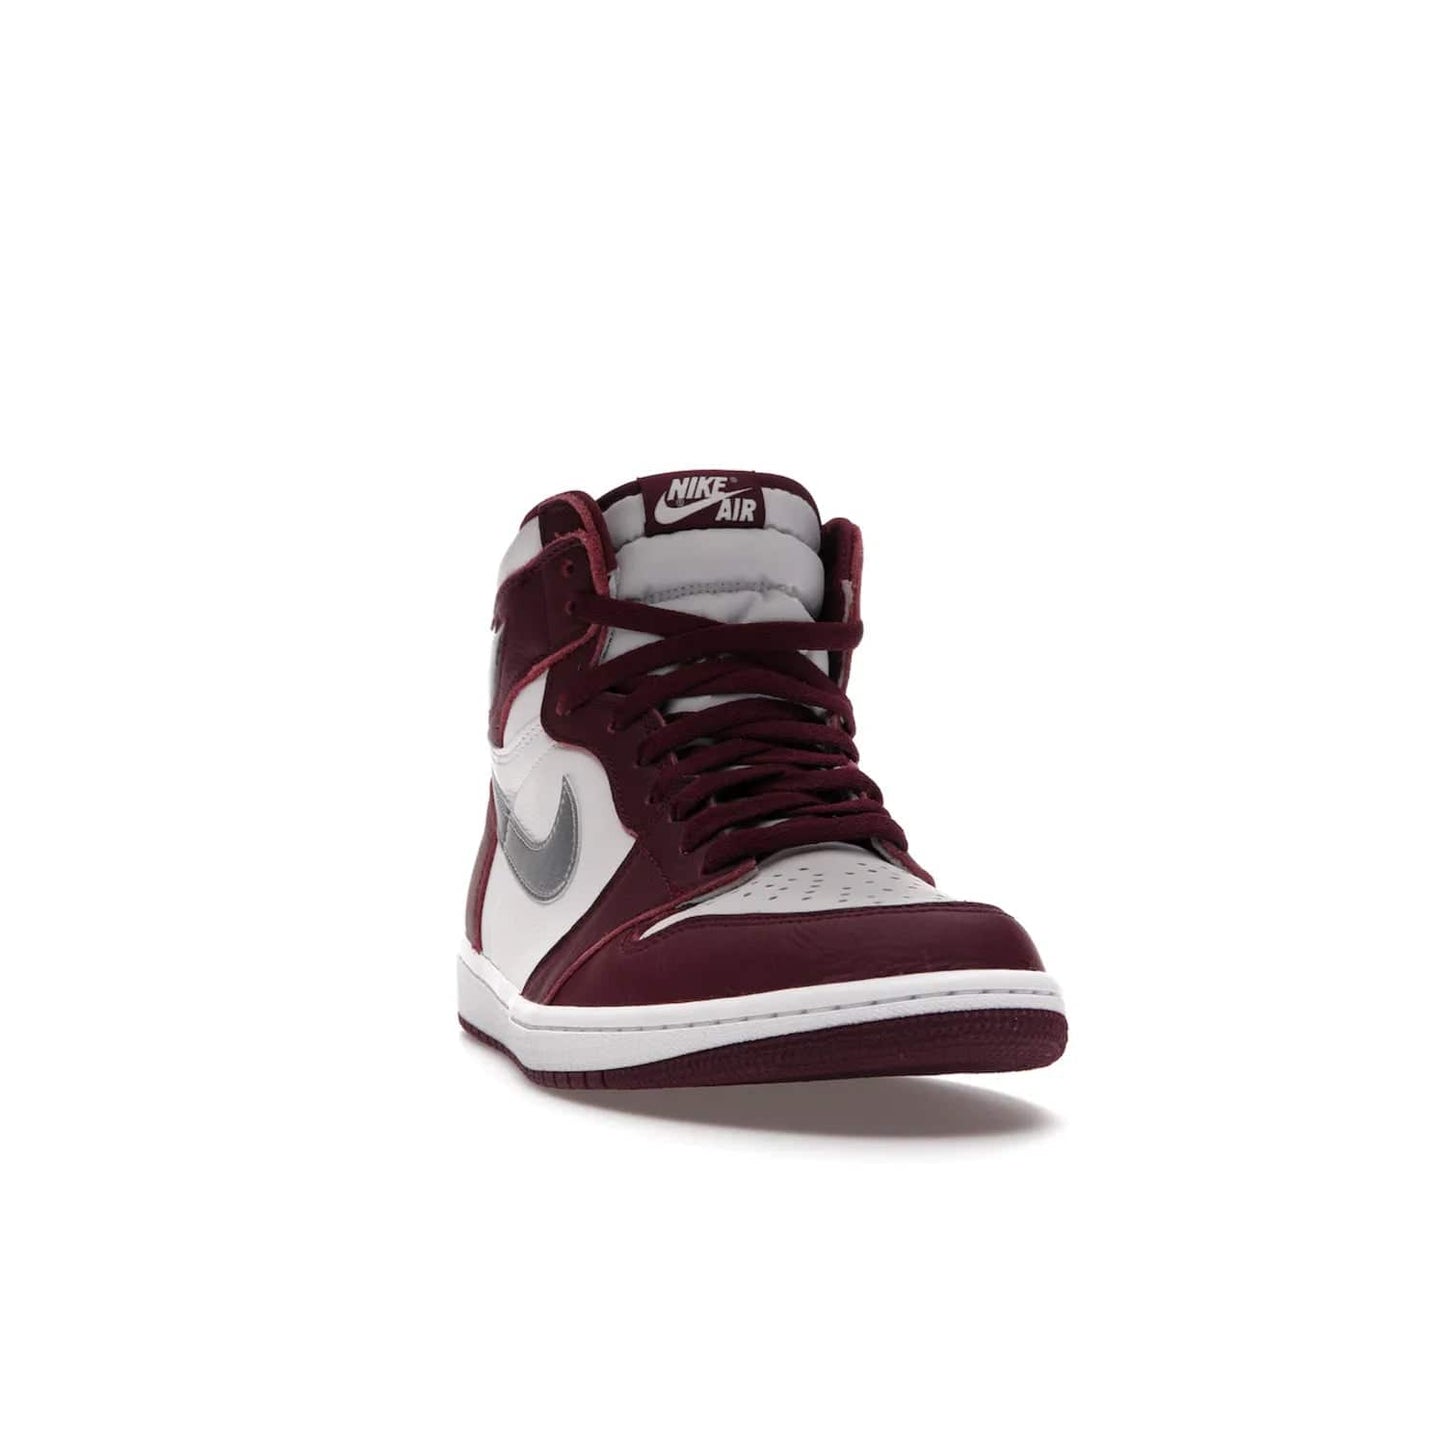 Jordan 1 Retro High OG Bordeaux - Image 8 - Only at www.BallersClubKickz.com - Shop the classic Air Jordan 1 High Bordeaux with a modern high-top cut. The timeless Bordeaux and White-Metallic Silver colorway, releasing Nov 20, 2021, is perfect for practice or a night out.